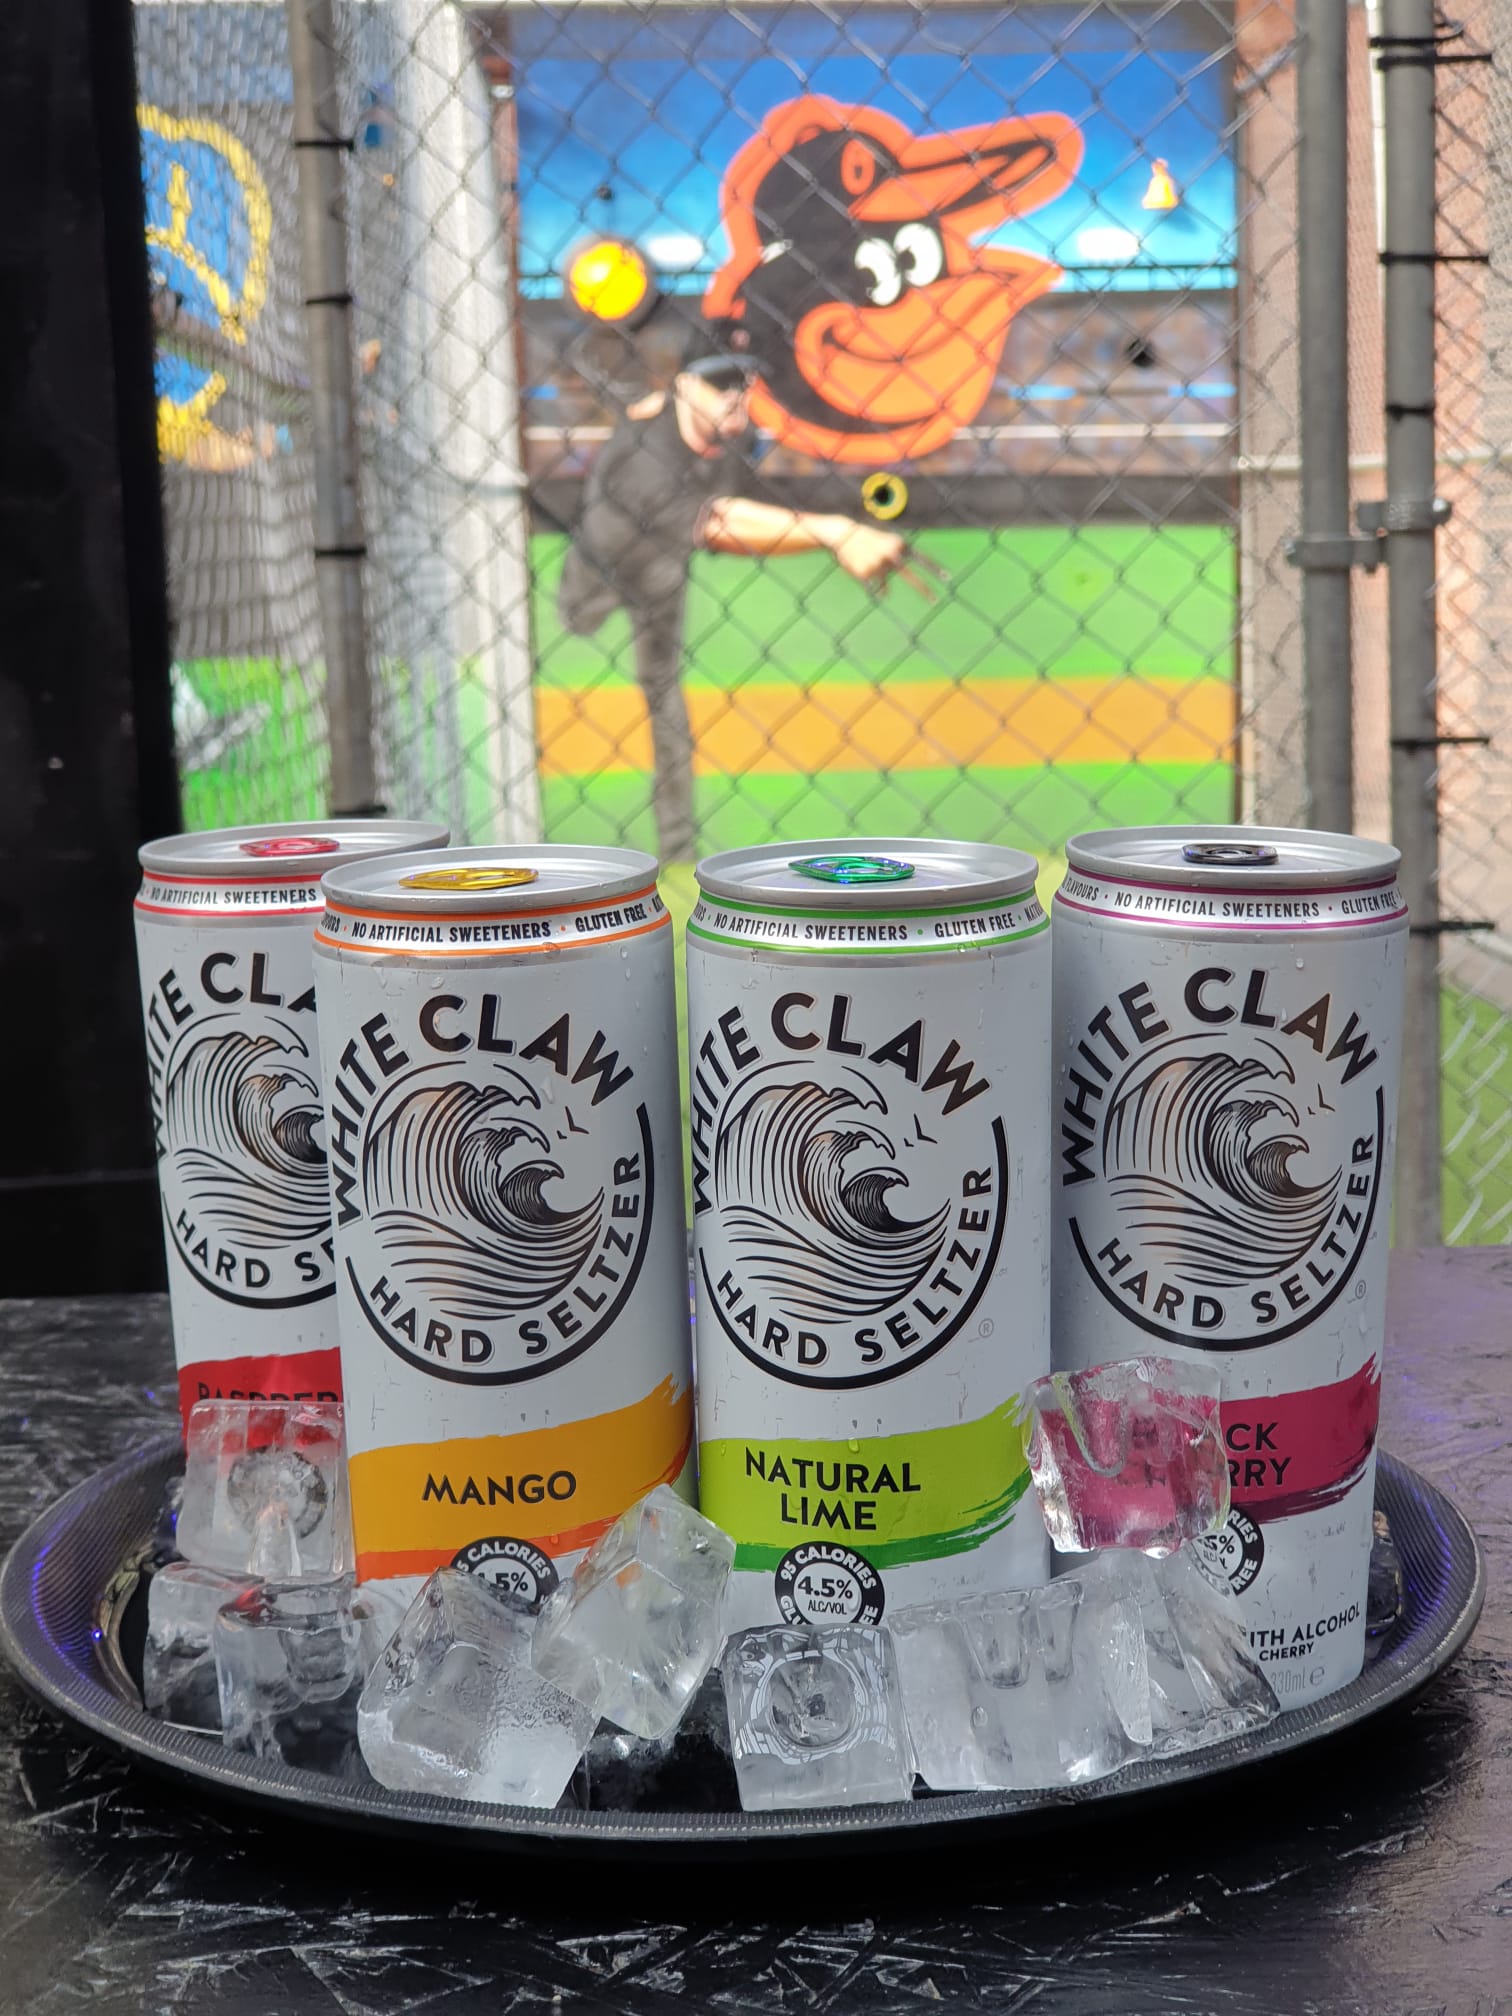 White Claw Hard Seltzer Taking Digbeth By Storm